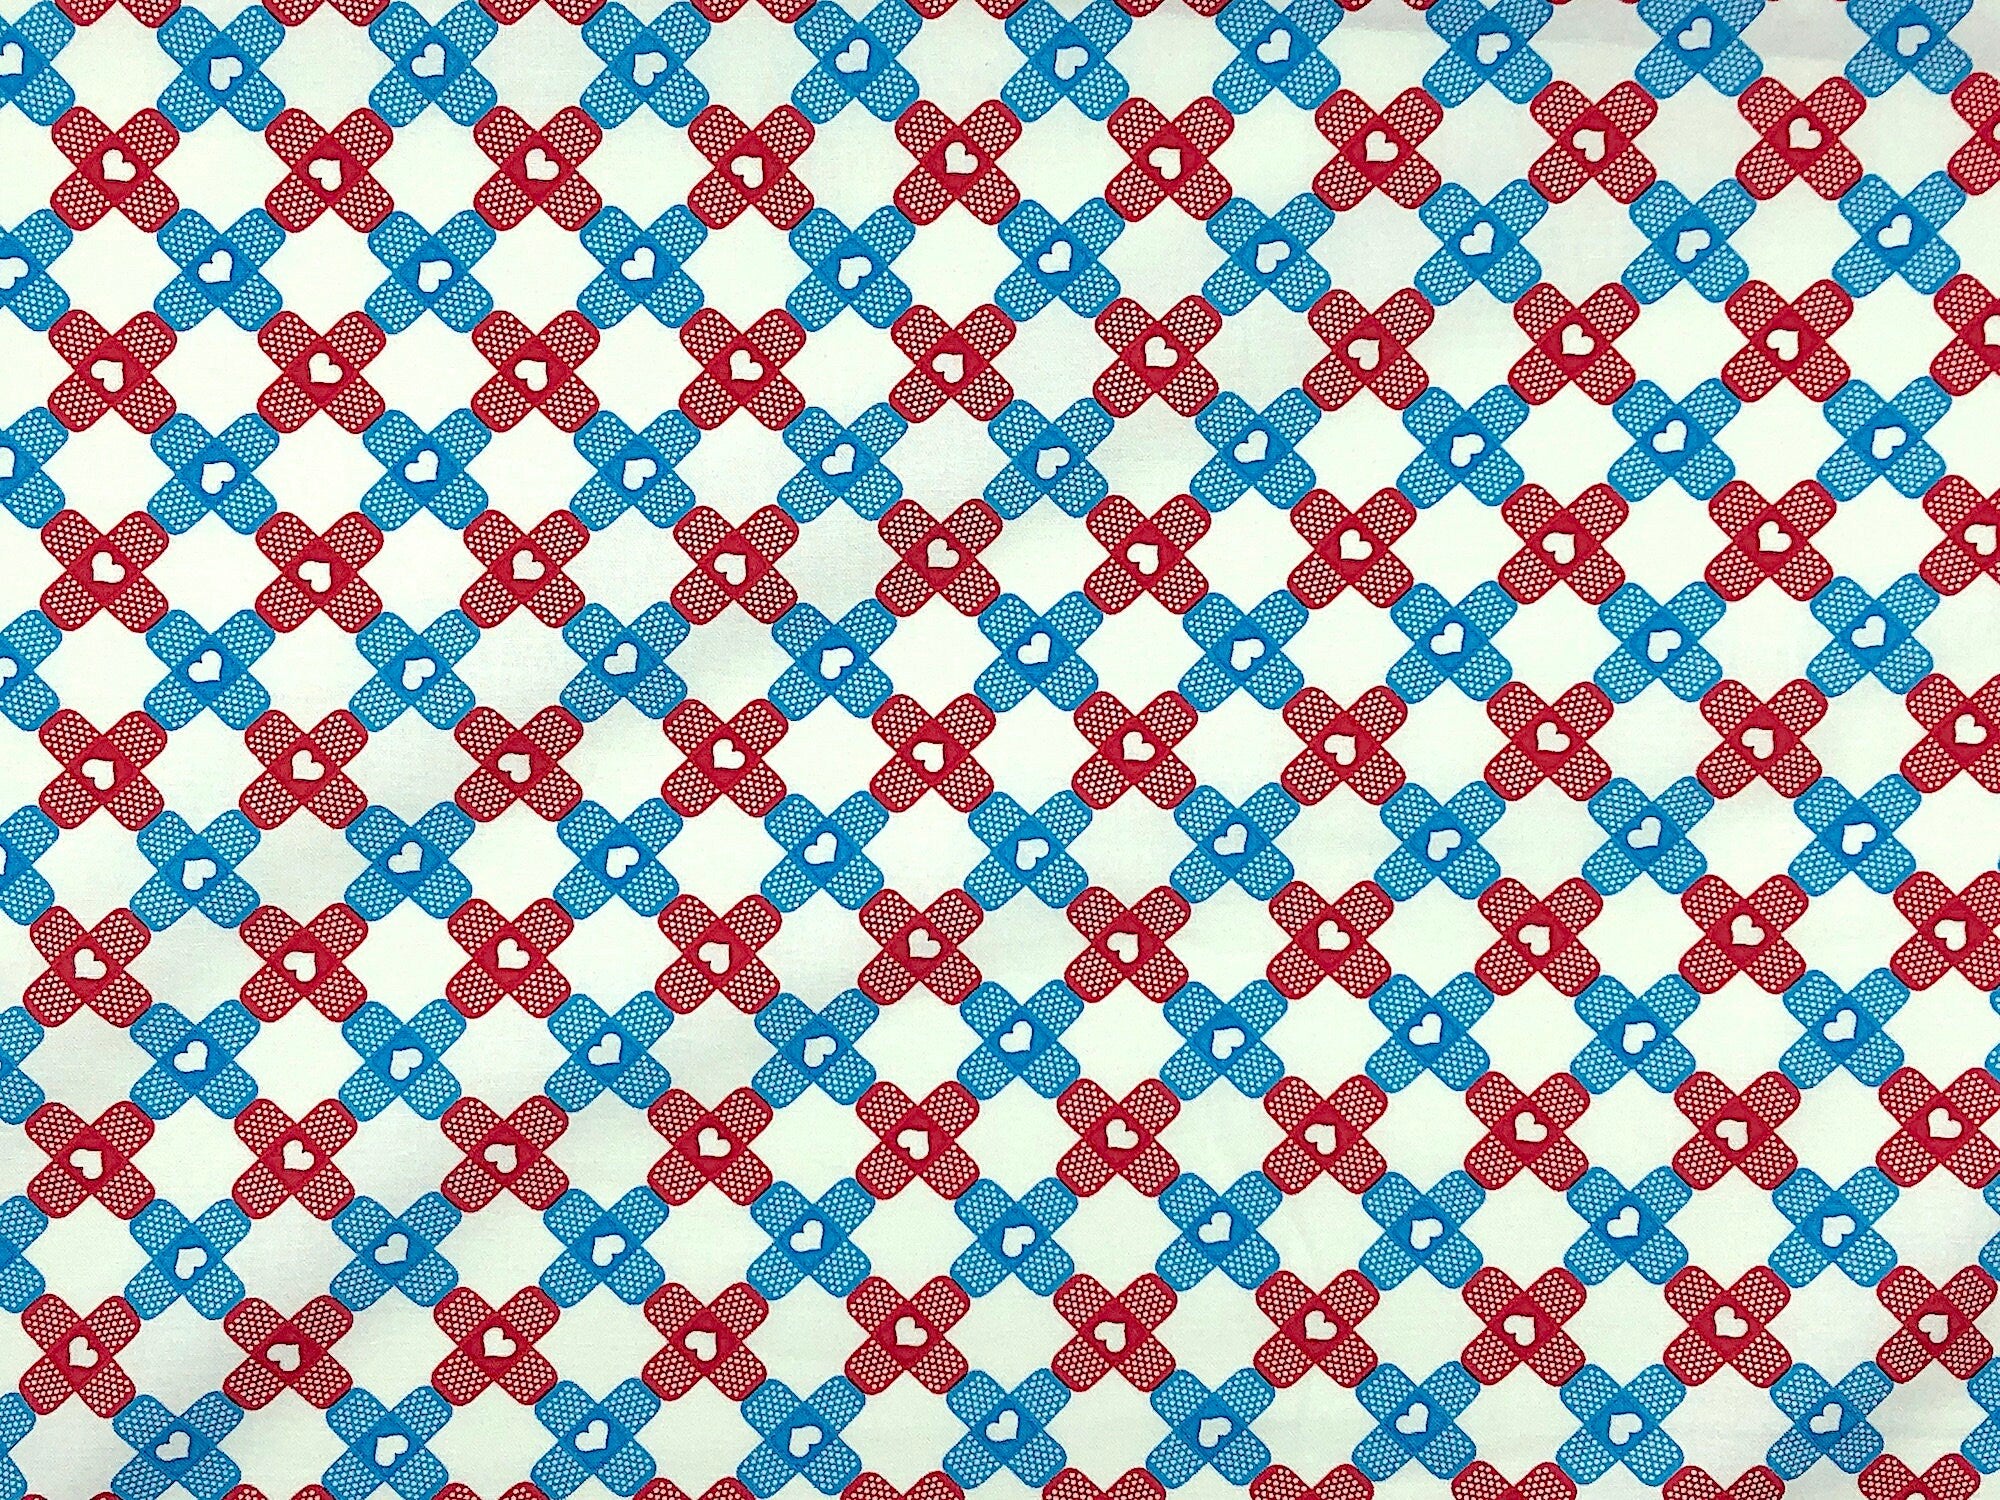 This fabric is part of the big hugs collection. The white fabric is covered with blue and red band aids. The band aids are arranged in a checkered pattern and have hearts in the middle of them.